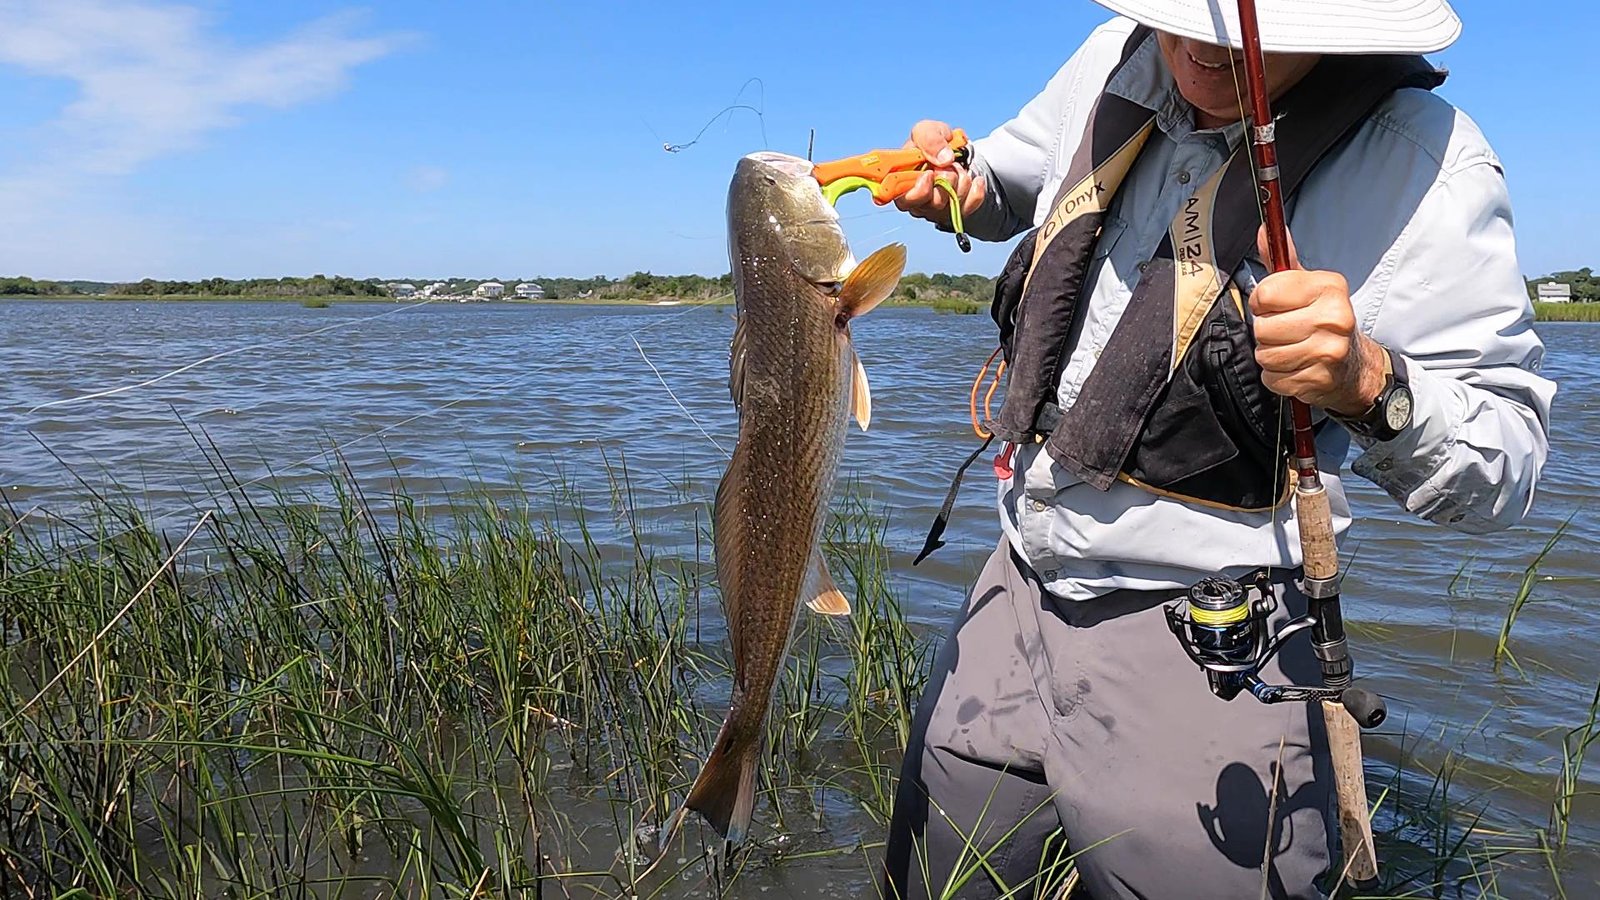 Best Way To Keep Fish Fresh on Kayak - CatchGuide Outdoors